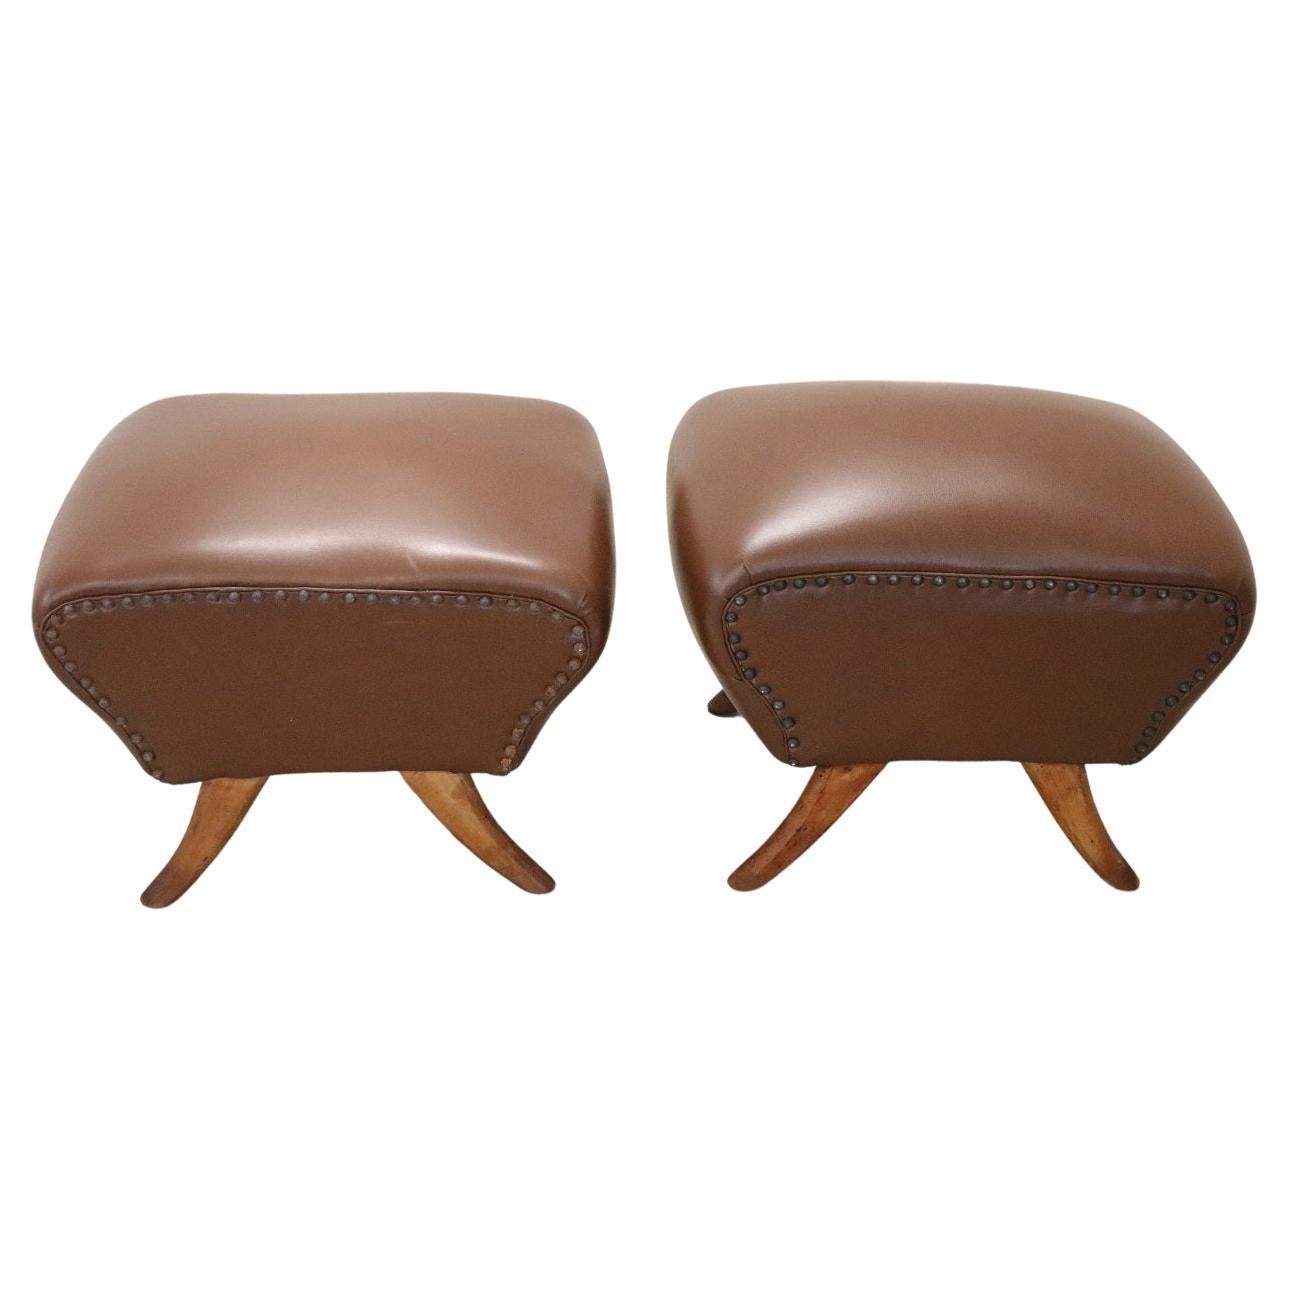 Italian Mid-Century Pair of Stools in Brown Faux Leather For Sale